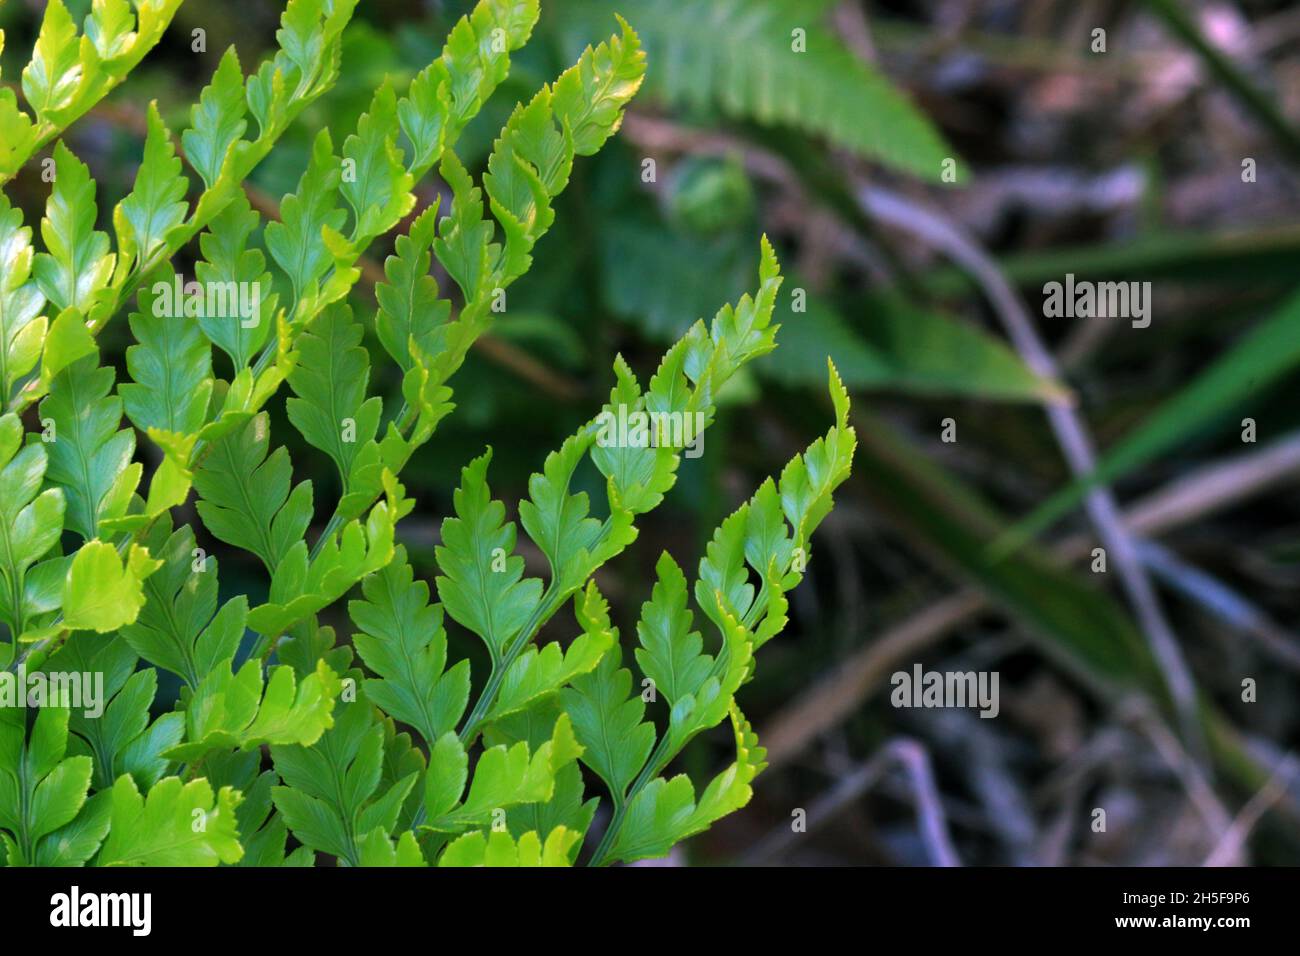 Fern, close-up, undergrowth of Atlantic Forest in Latin America Stock Photo